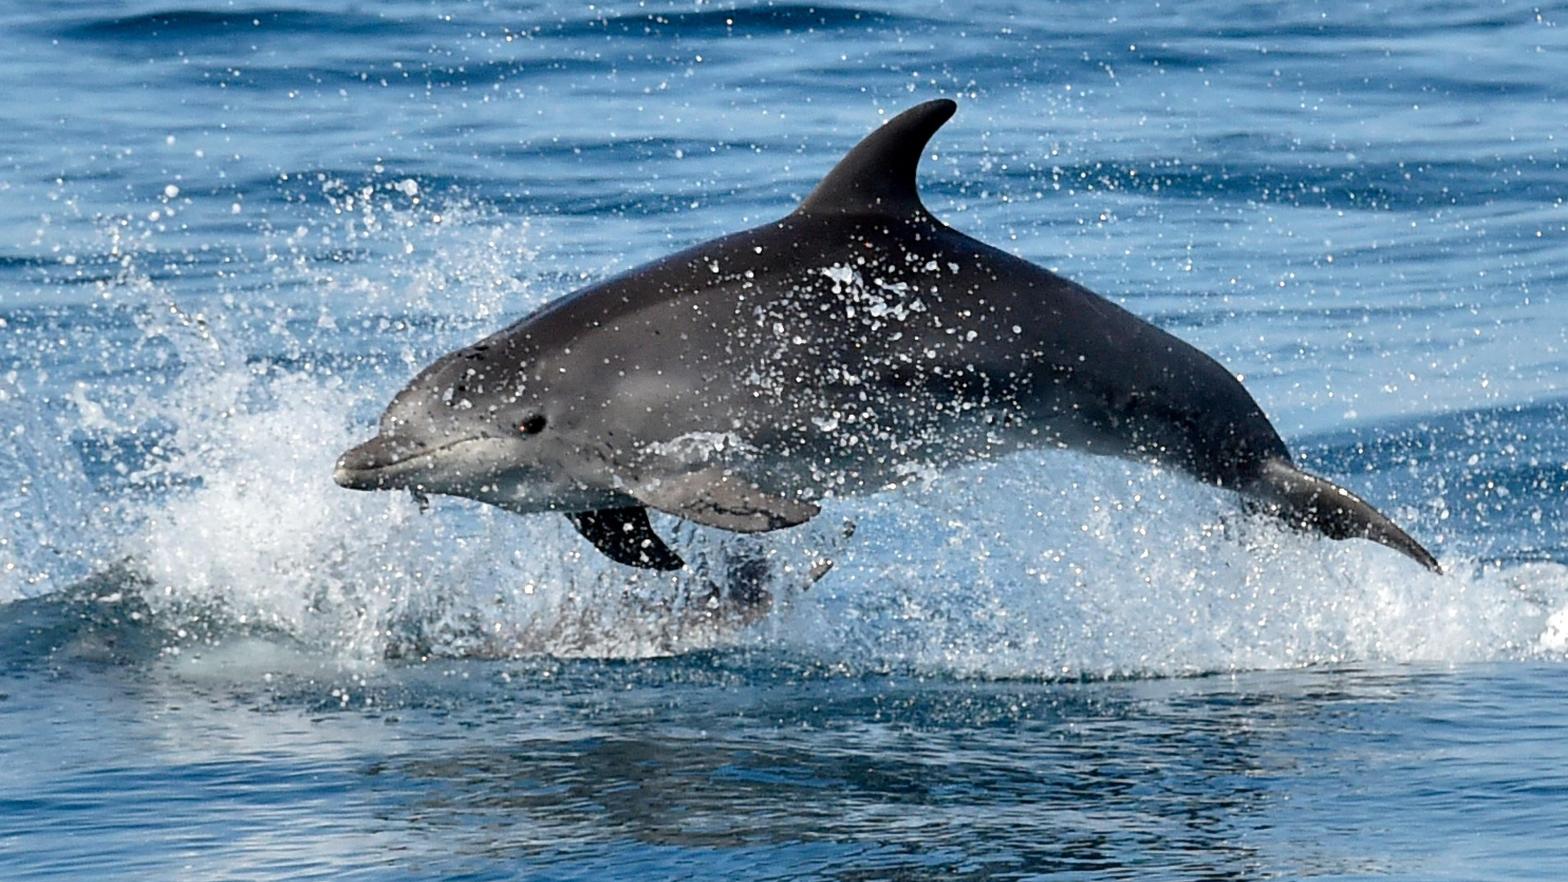 The dolphins were spotted via satellite images. (Image: RAYMOND ROIG, Getty Images)